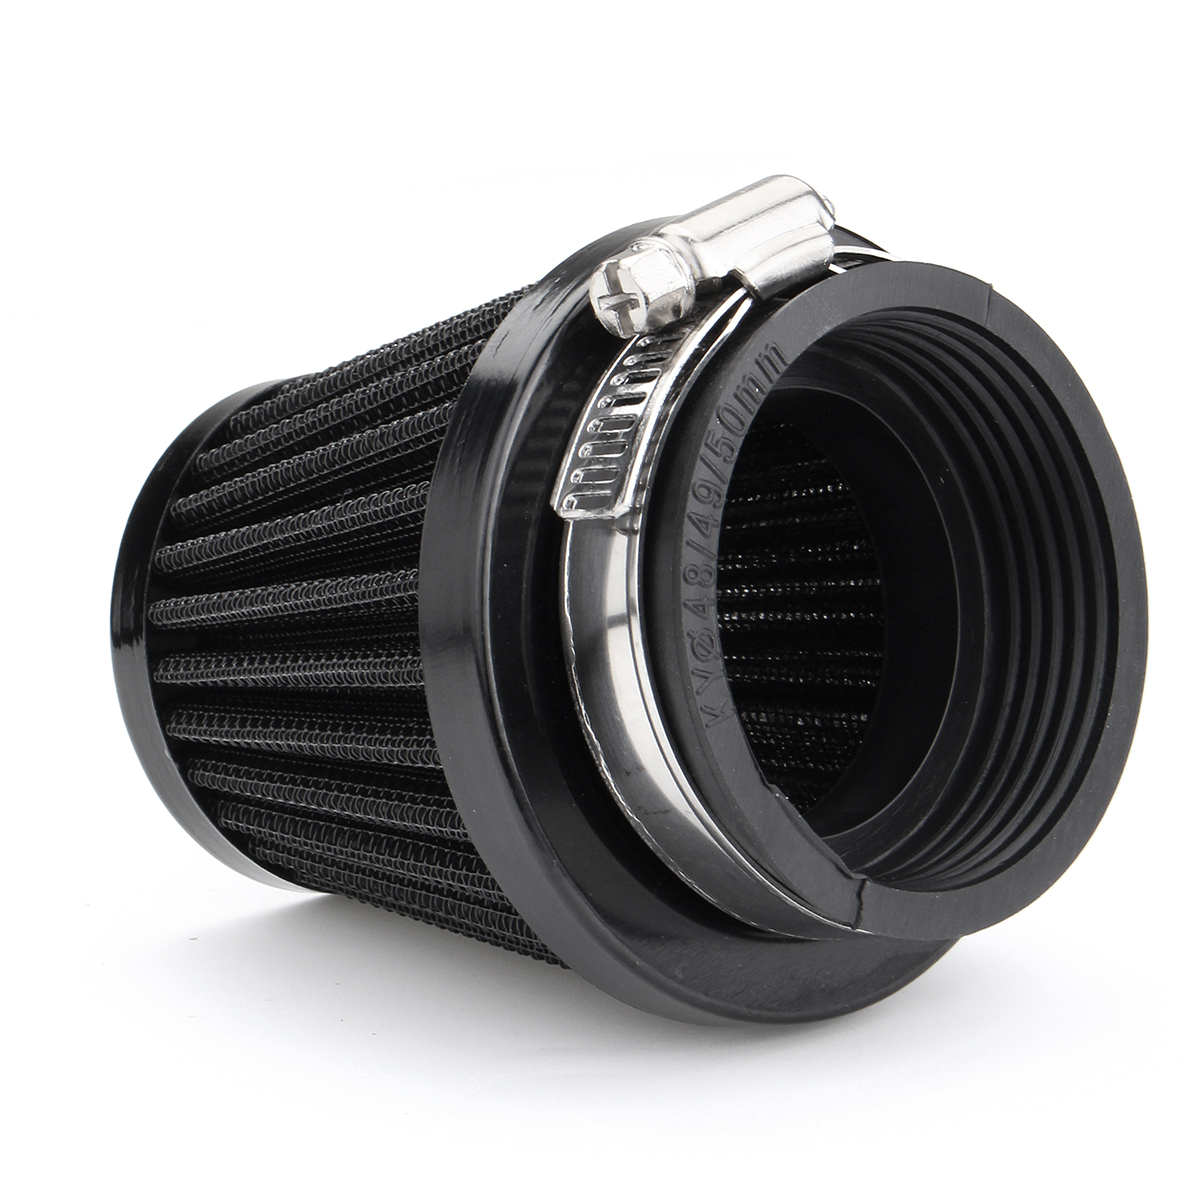 35mm39mm48mm50mm54mm60mm-Air-Filter-Cleaner-For-Motorcycle-ATV-Dirt-Bike-Quad-Scooter-1356901